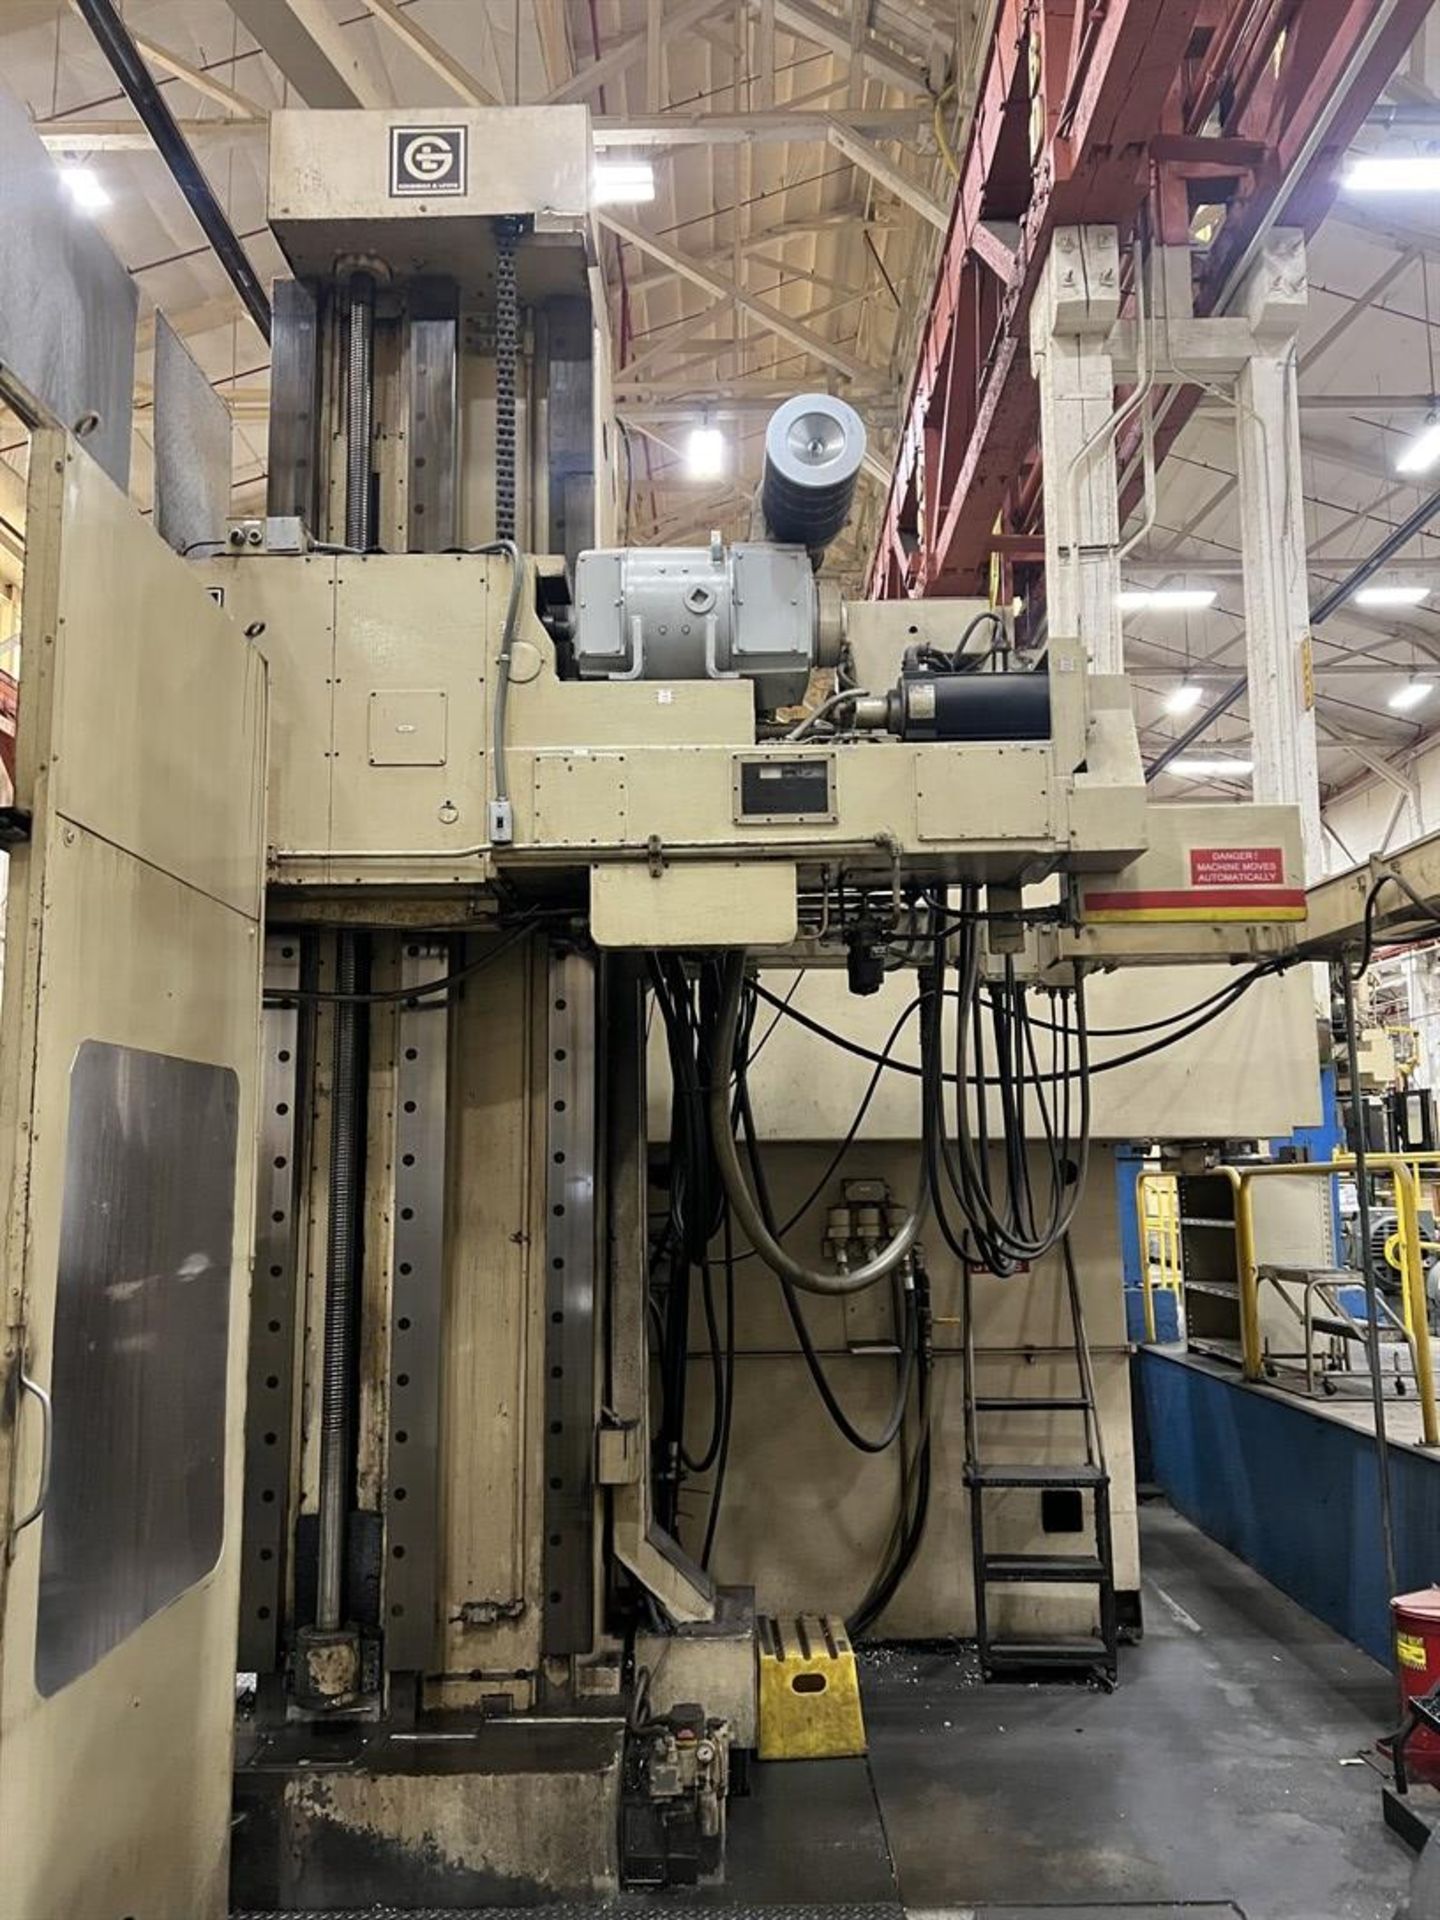 GIDDINGS & LEWIS MC 60 Horizontal Machining Center, s/n 450-232-90, G & L 8000 Control, 6” Spindle - Image 11 of 16